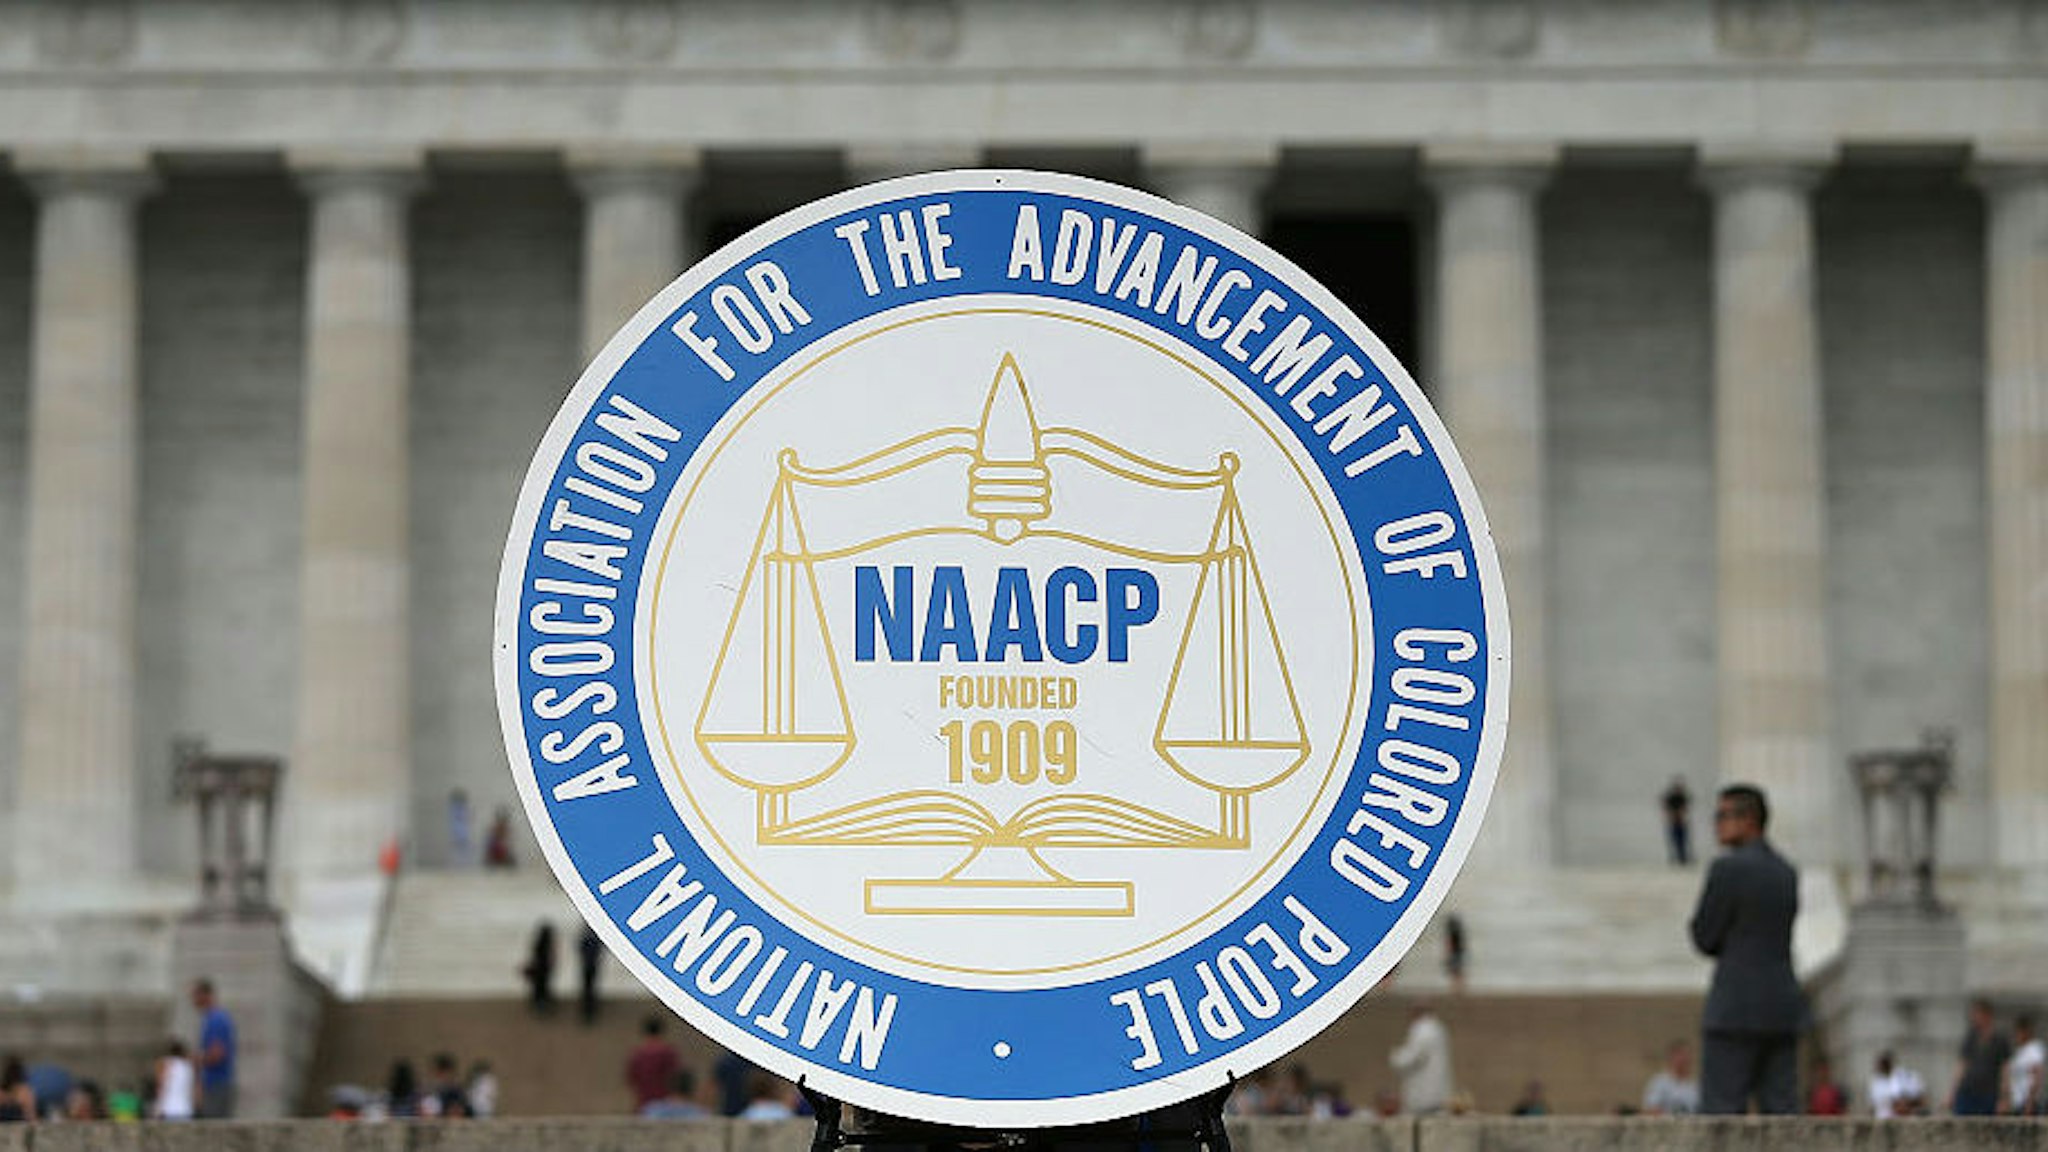 A logo is seen for the National Association for the Advancement of Colored People as NAACP President and CEO Cornell William Brooks speaks during a press conference at the Lincoln Memorial June 15, 2015 in Washington, DC.